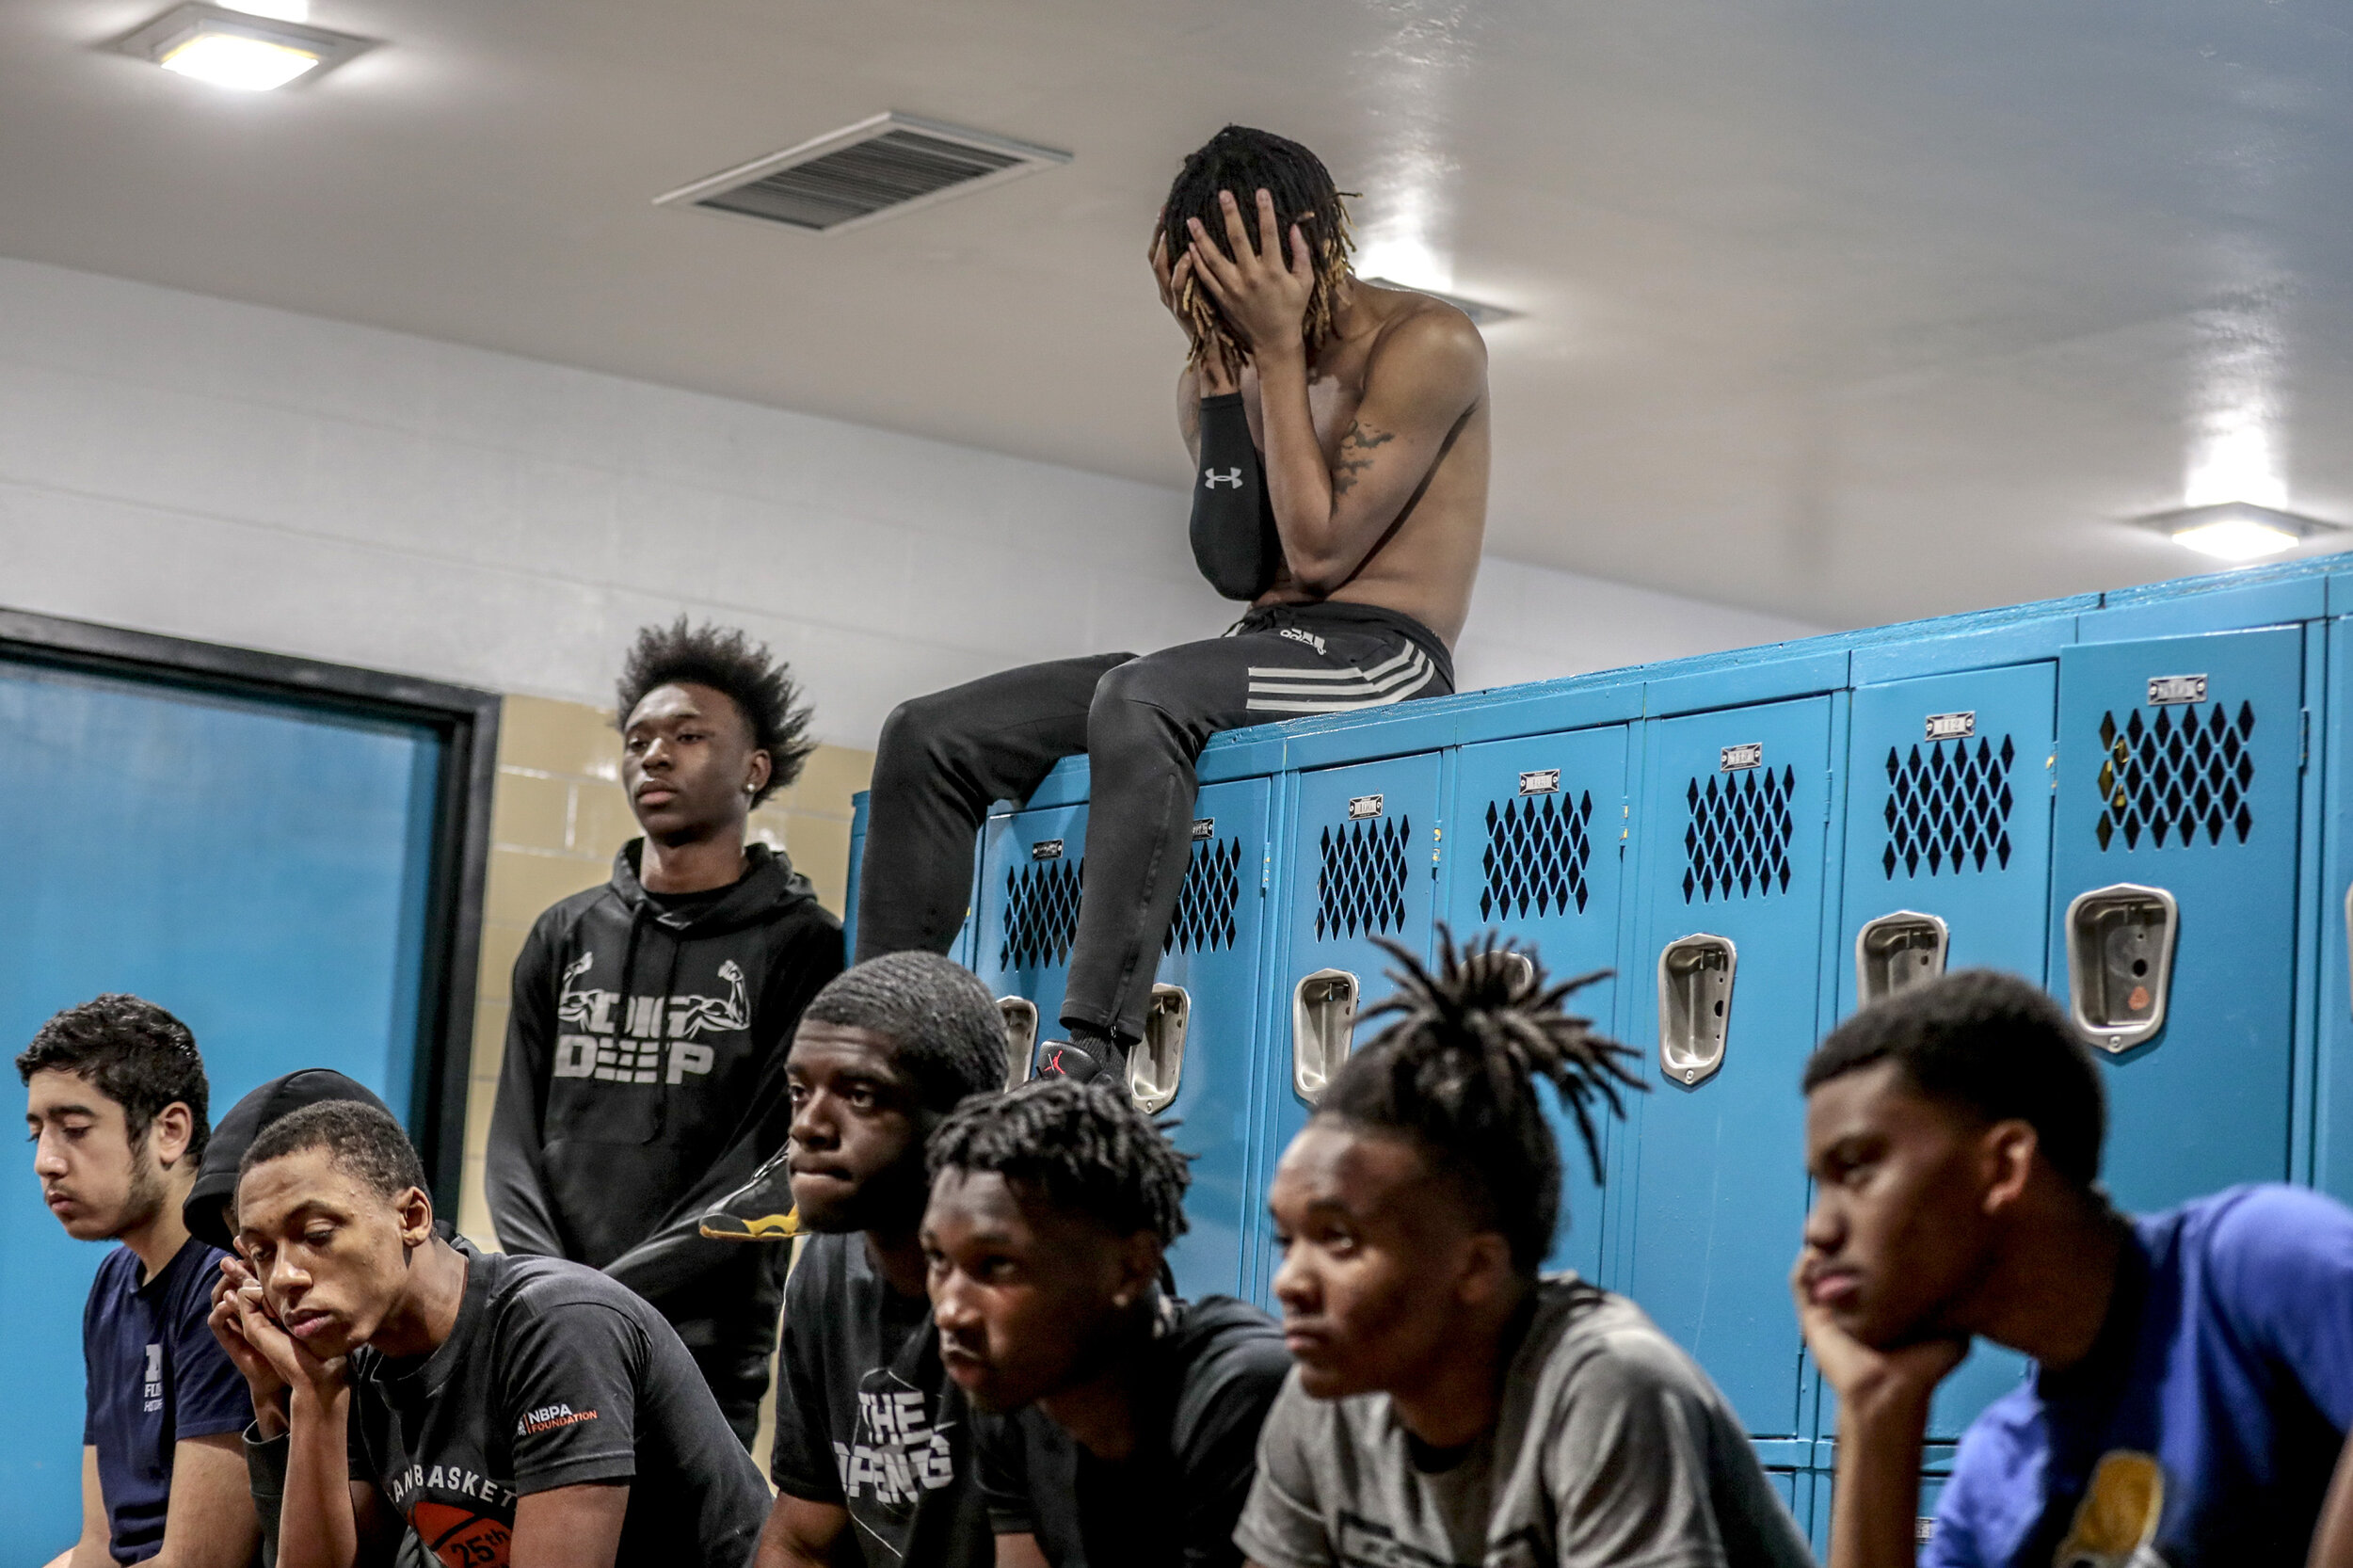  “They say they love basketball, but some people just like it. I wish he would have taken it seriously. He could have gone to a high [Division I school] or something,” said Beecher High basketball star Jalen Terry about Taevion. Taevion buries his fa